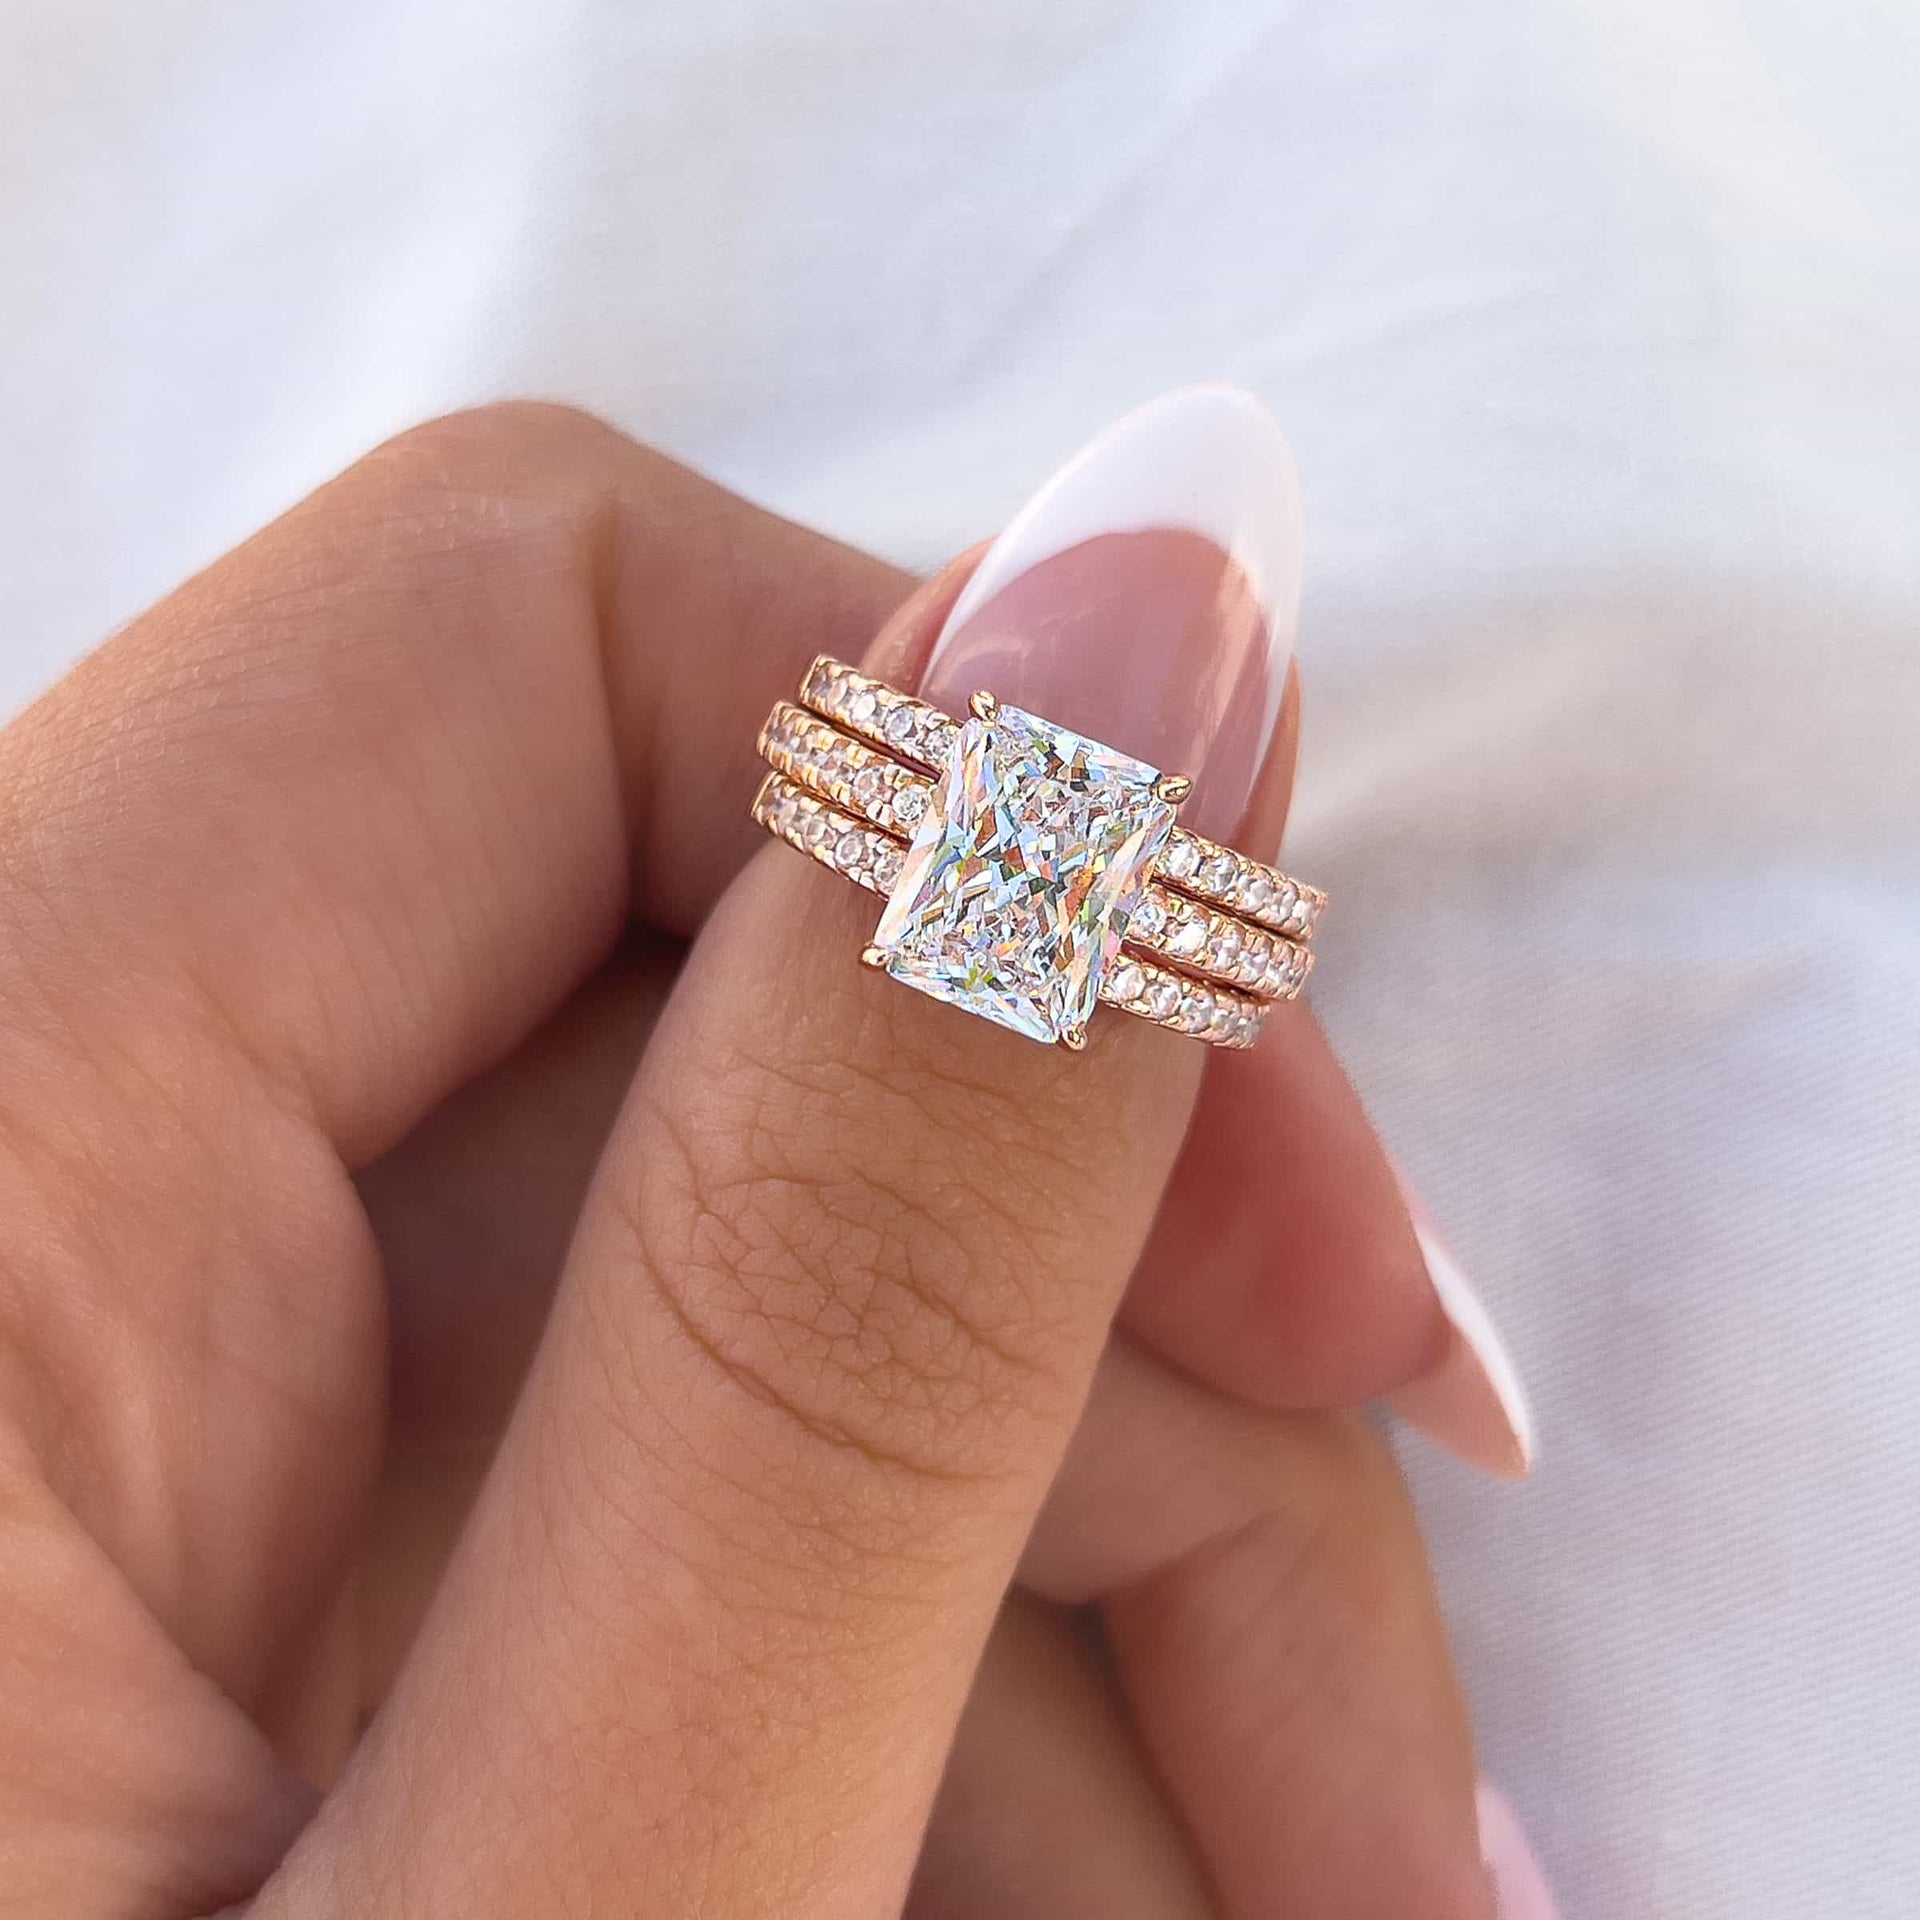 gorgeous radiant cut wedding ring stack shown in rose gold